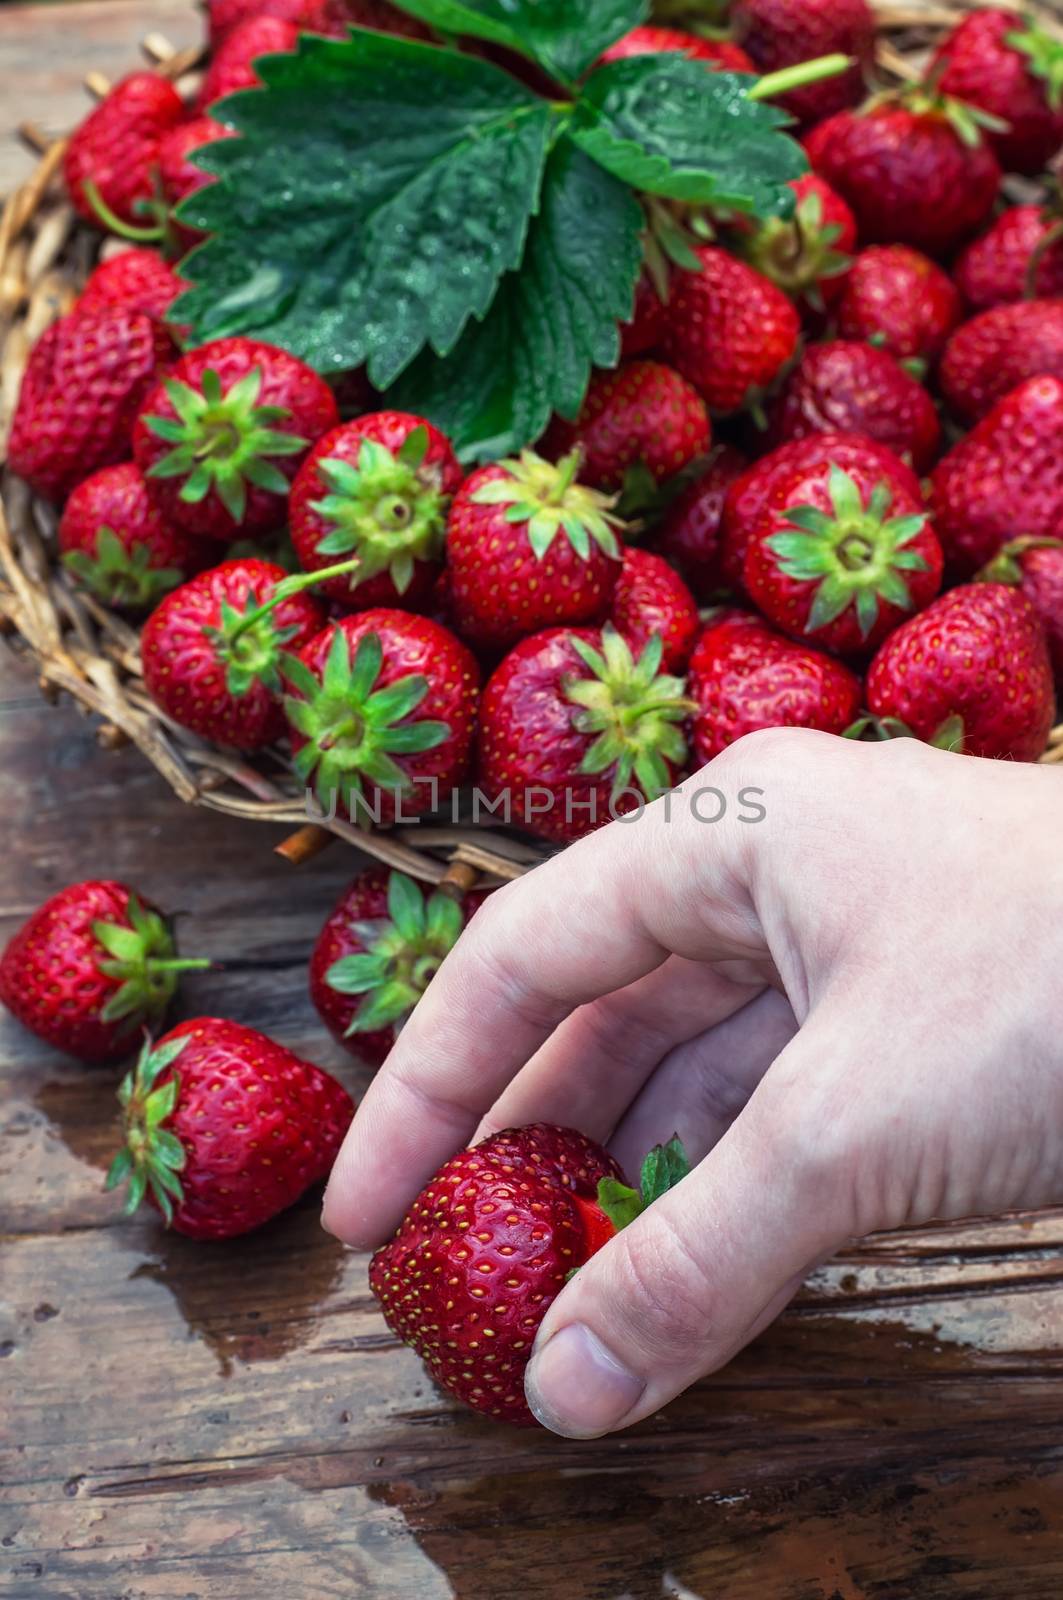 wicker basket with ripe strawberries on garden table.Selective focus